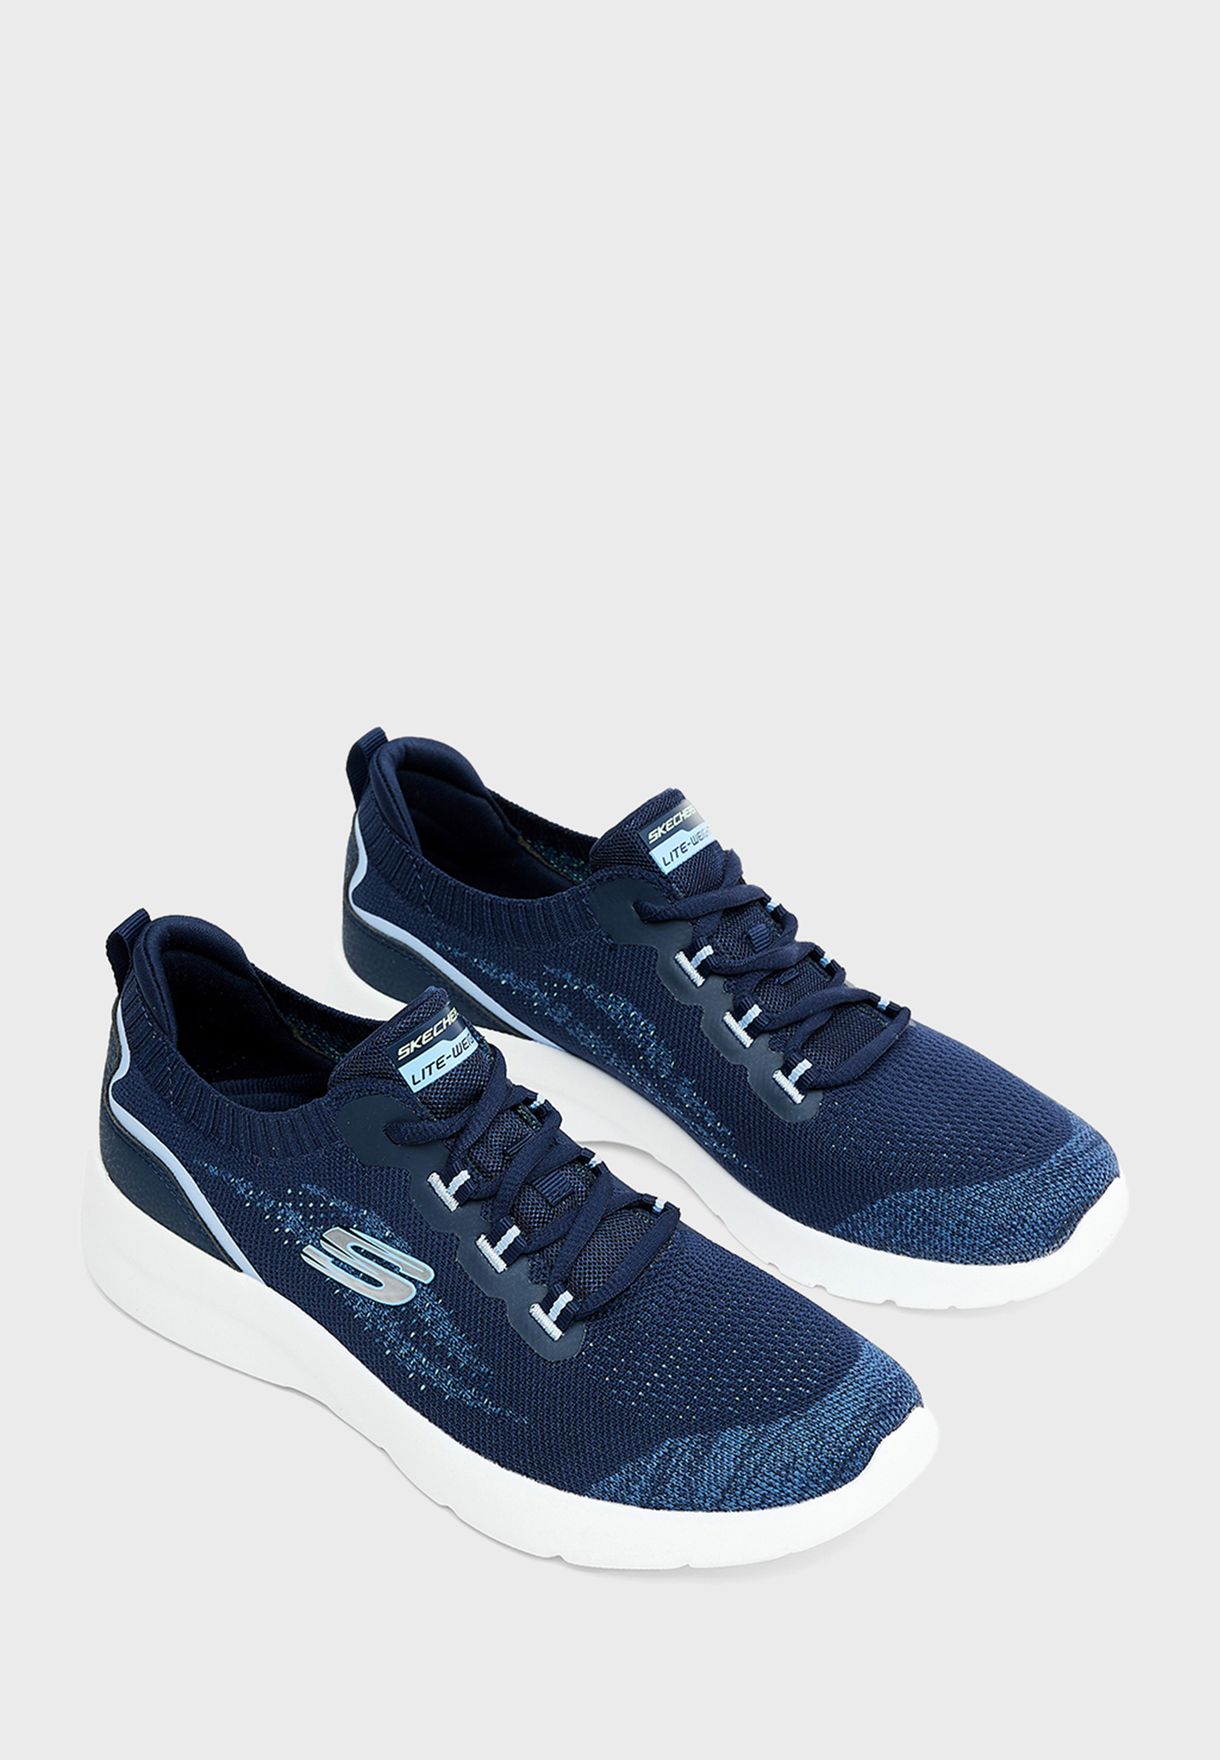 Dynamight 2.0 Walking Shoes